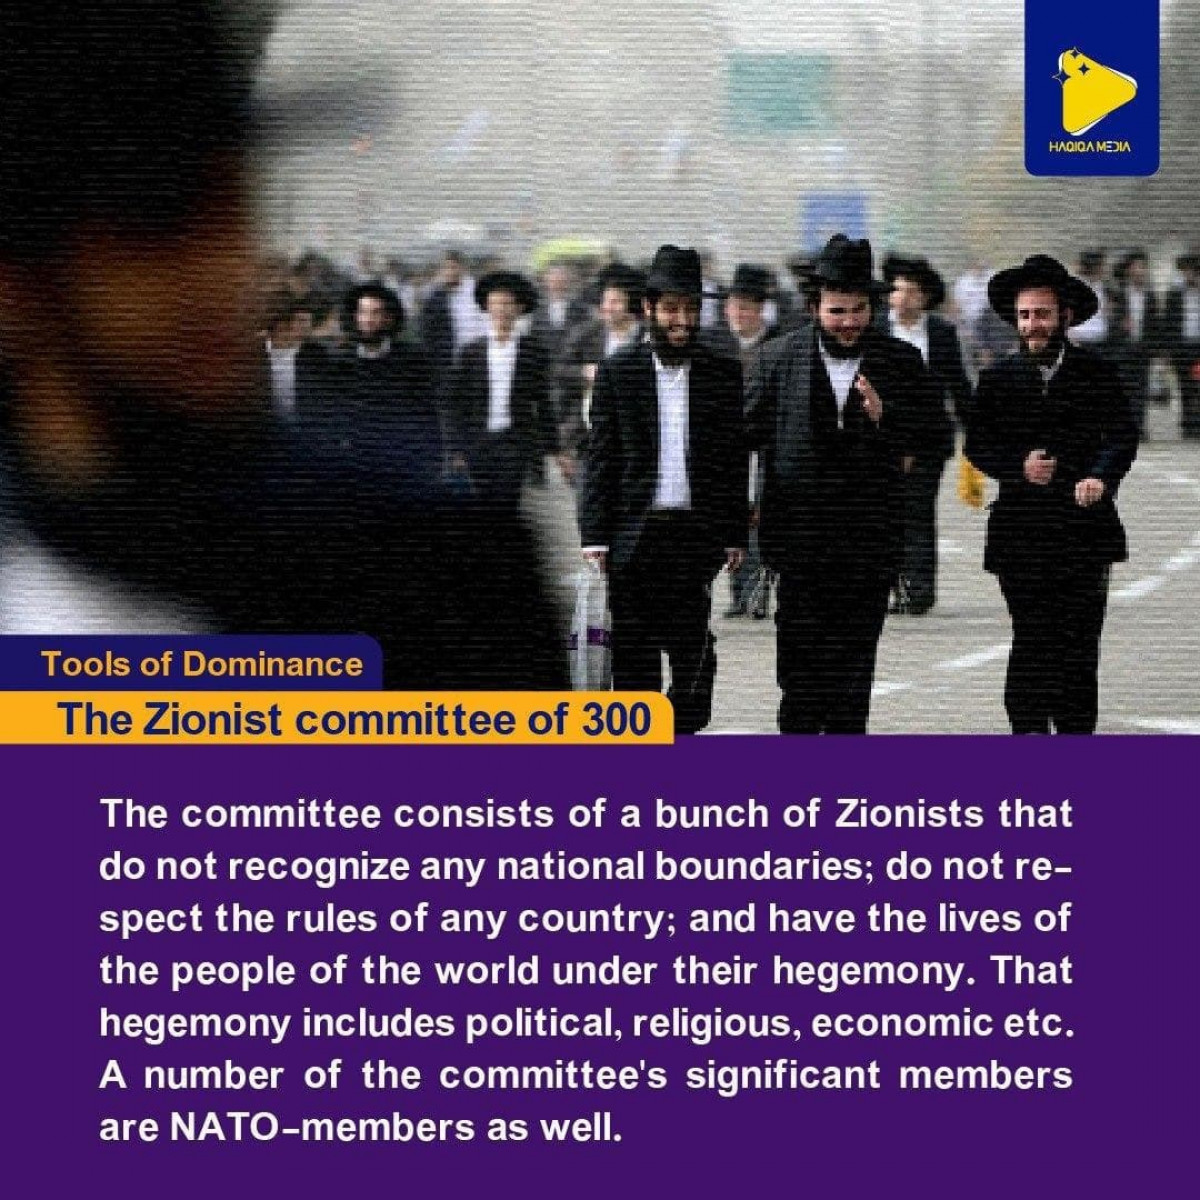 Tools of hegemony: The Zionist committee of 300